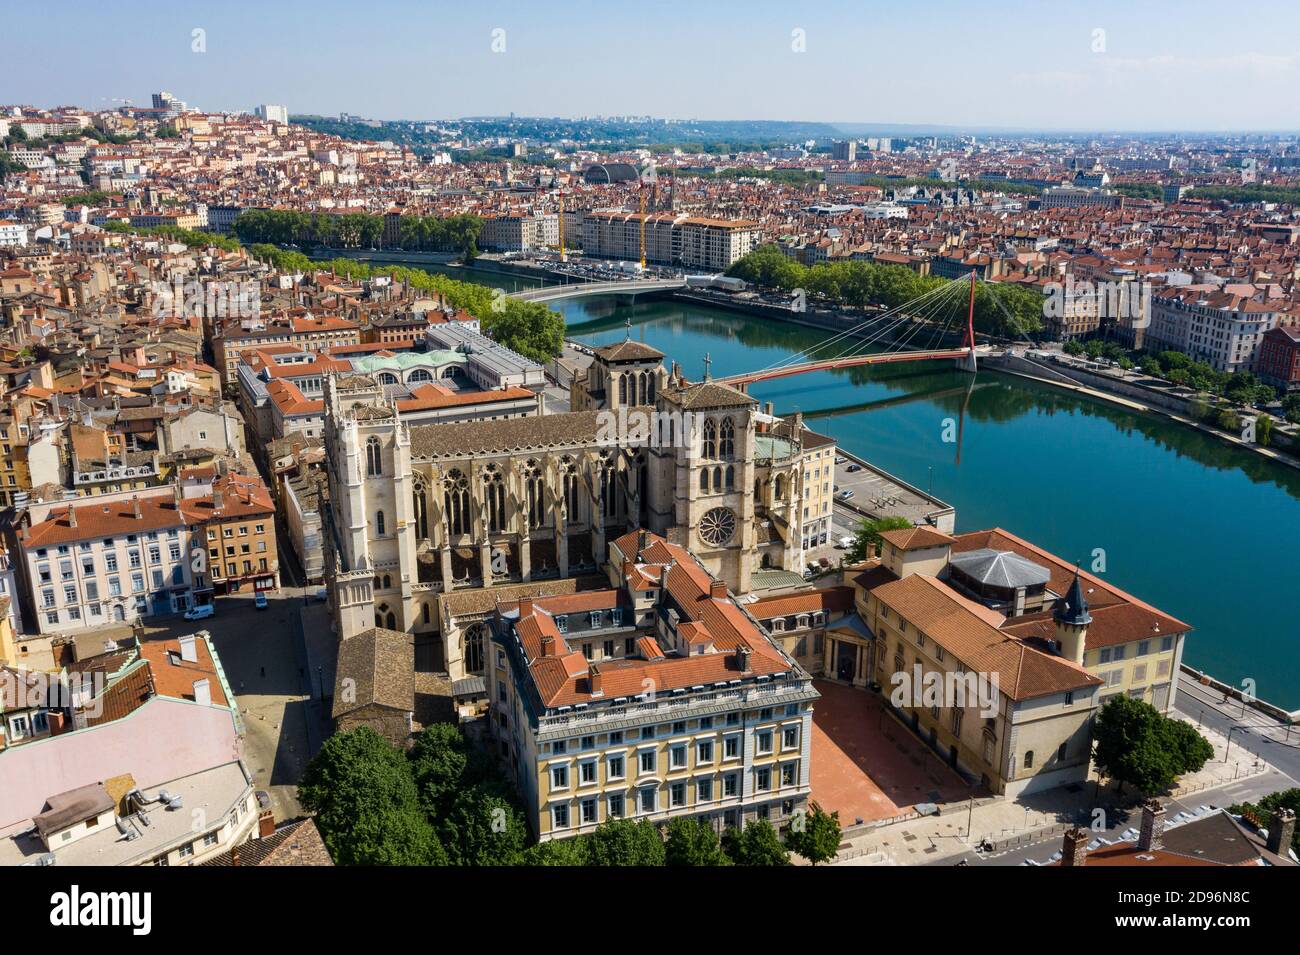 Lyon (central-eastern France): aerial view of “place Saint-Jean” square and Lyon Cathedral, by the river Saone, in the heart of medieval and Renaissan Stock Photo